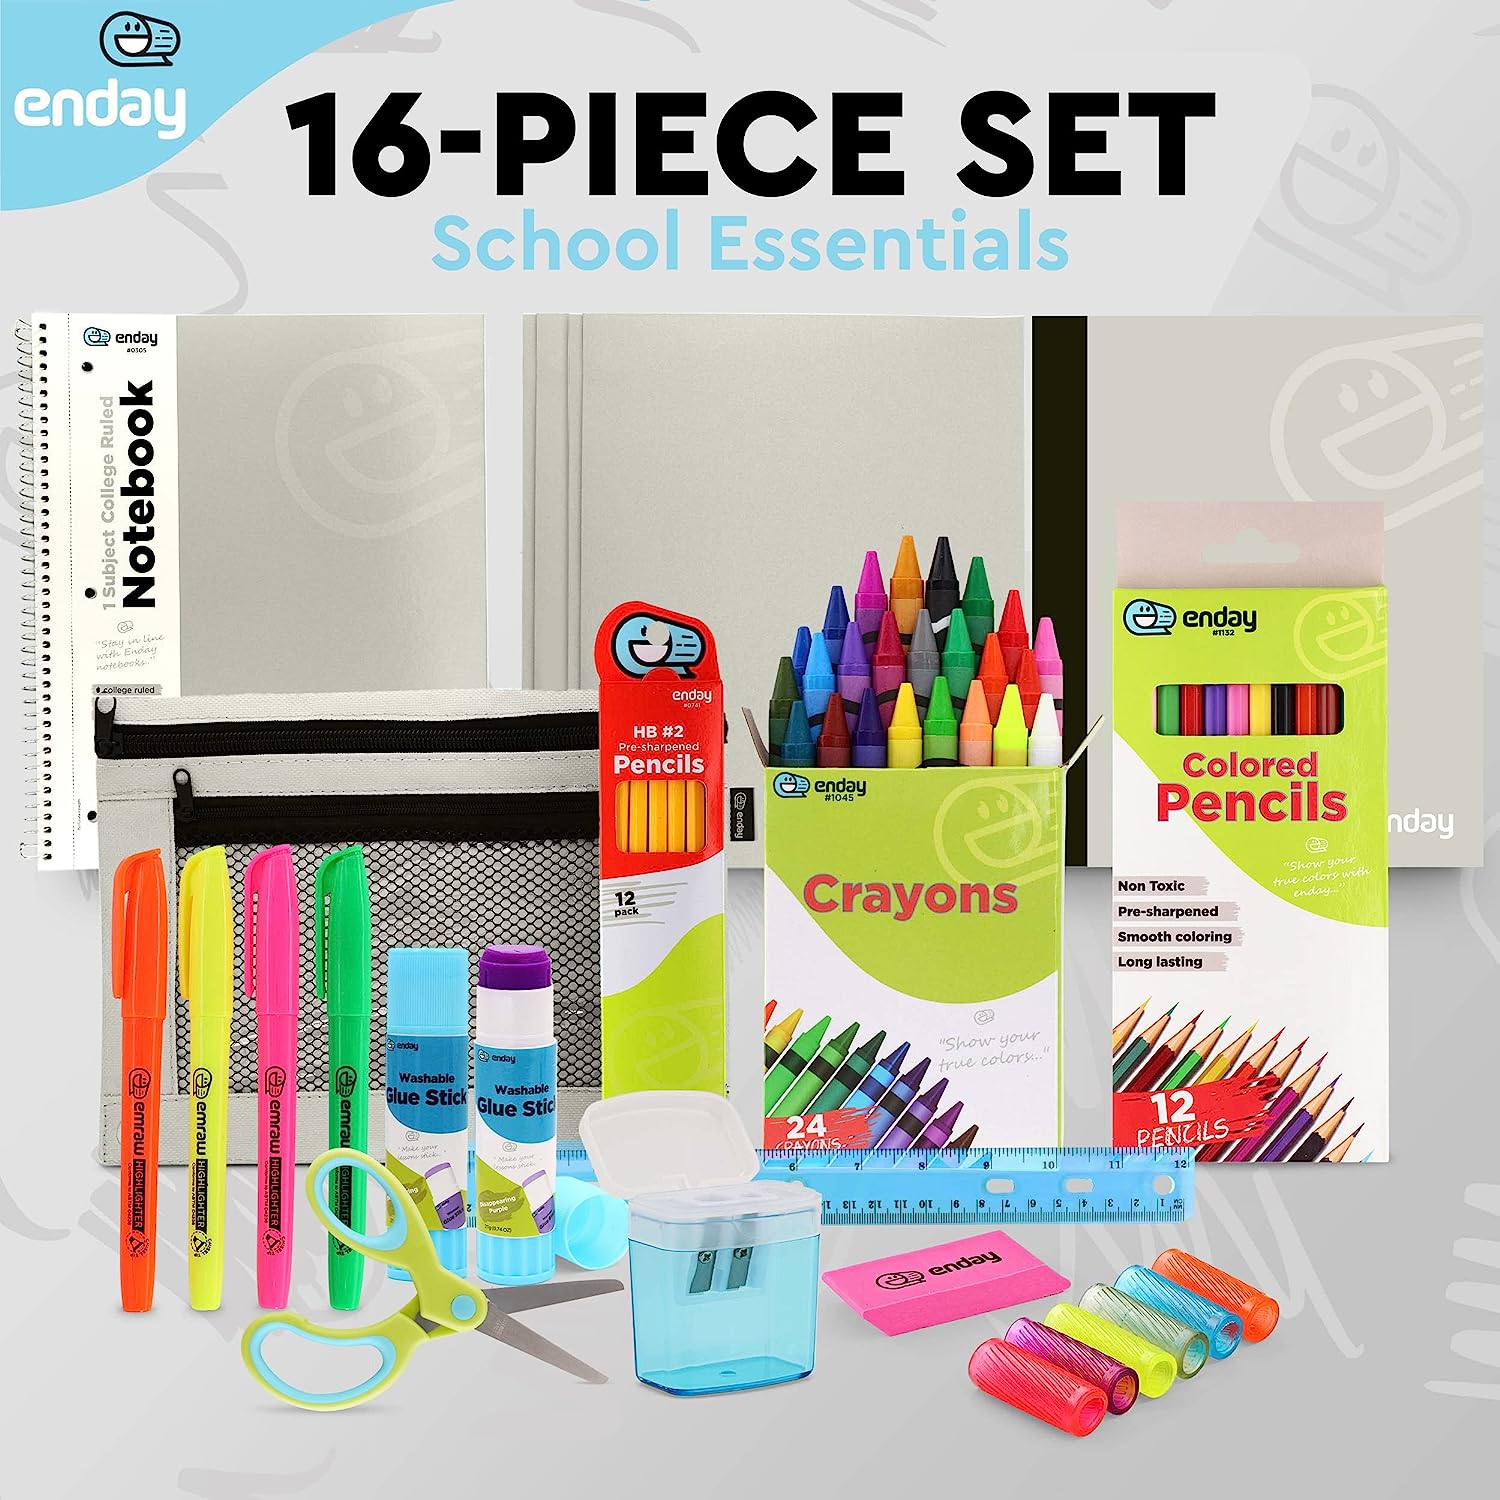 Back to School Supplies & Gear for 2021